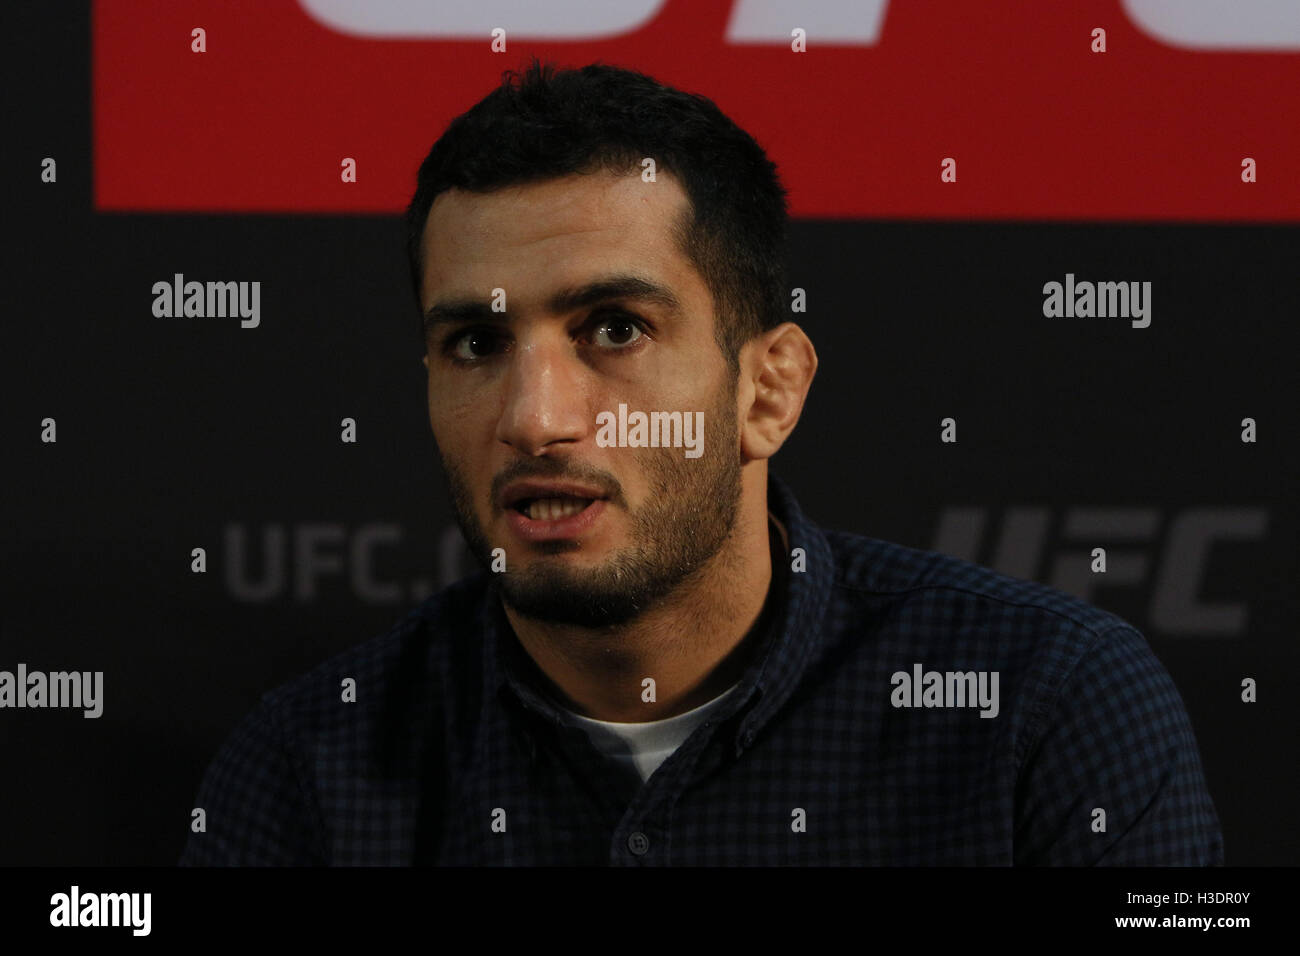 Manchester, UK. 6th October, 2016. UFC 204 - Media Day at Arena Manchester. Thursday the 6 of Oct. 2016.Gegard Mousasi answers media questions ahead of UFC 204.   Credit:  Dan Cooke/Alamy Live News Stock Photo